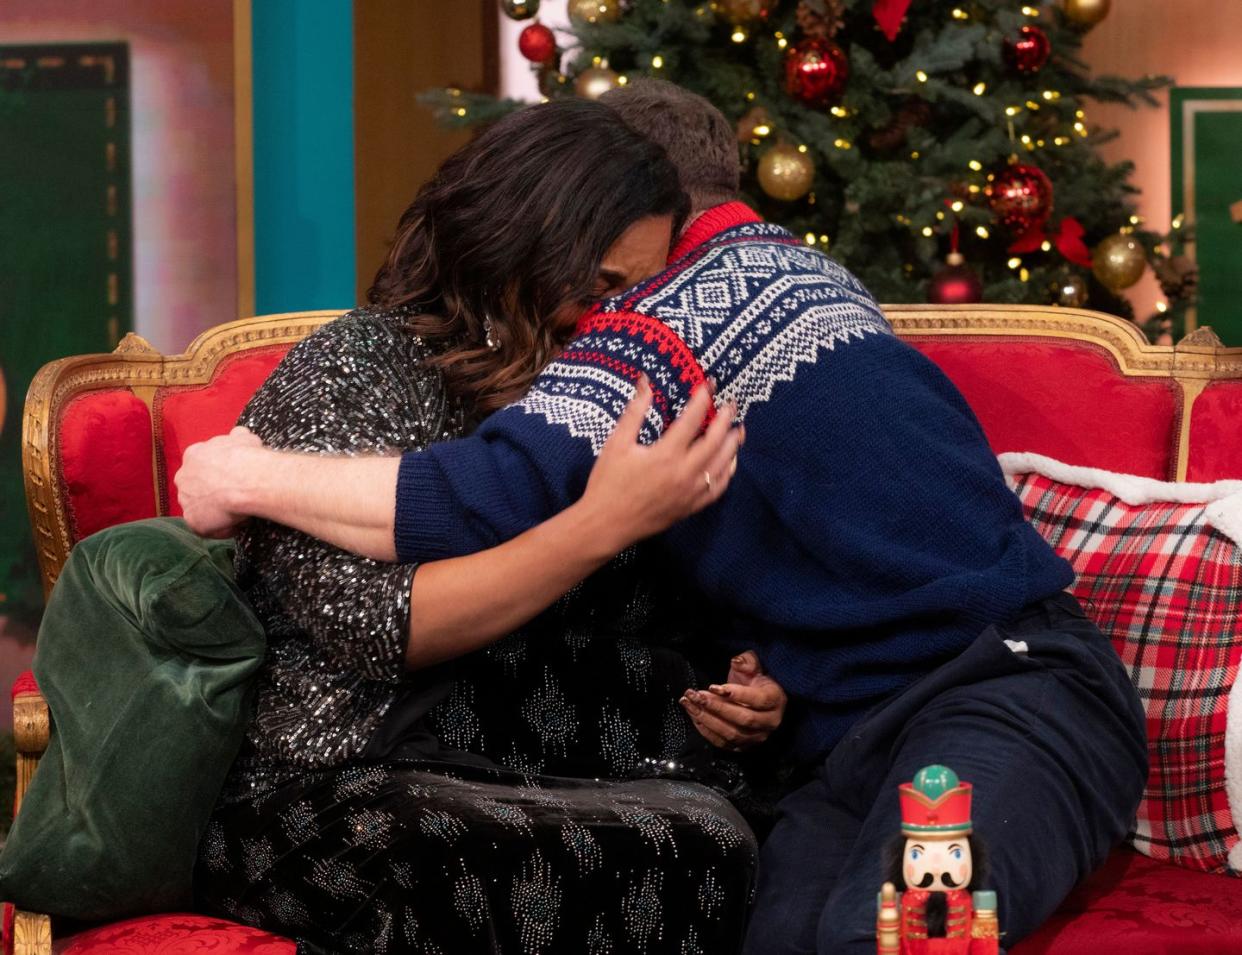 alison hammond and dermot o'leary hug on the this morning sofa during the christmas episode